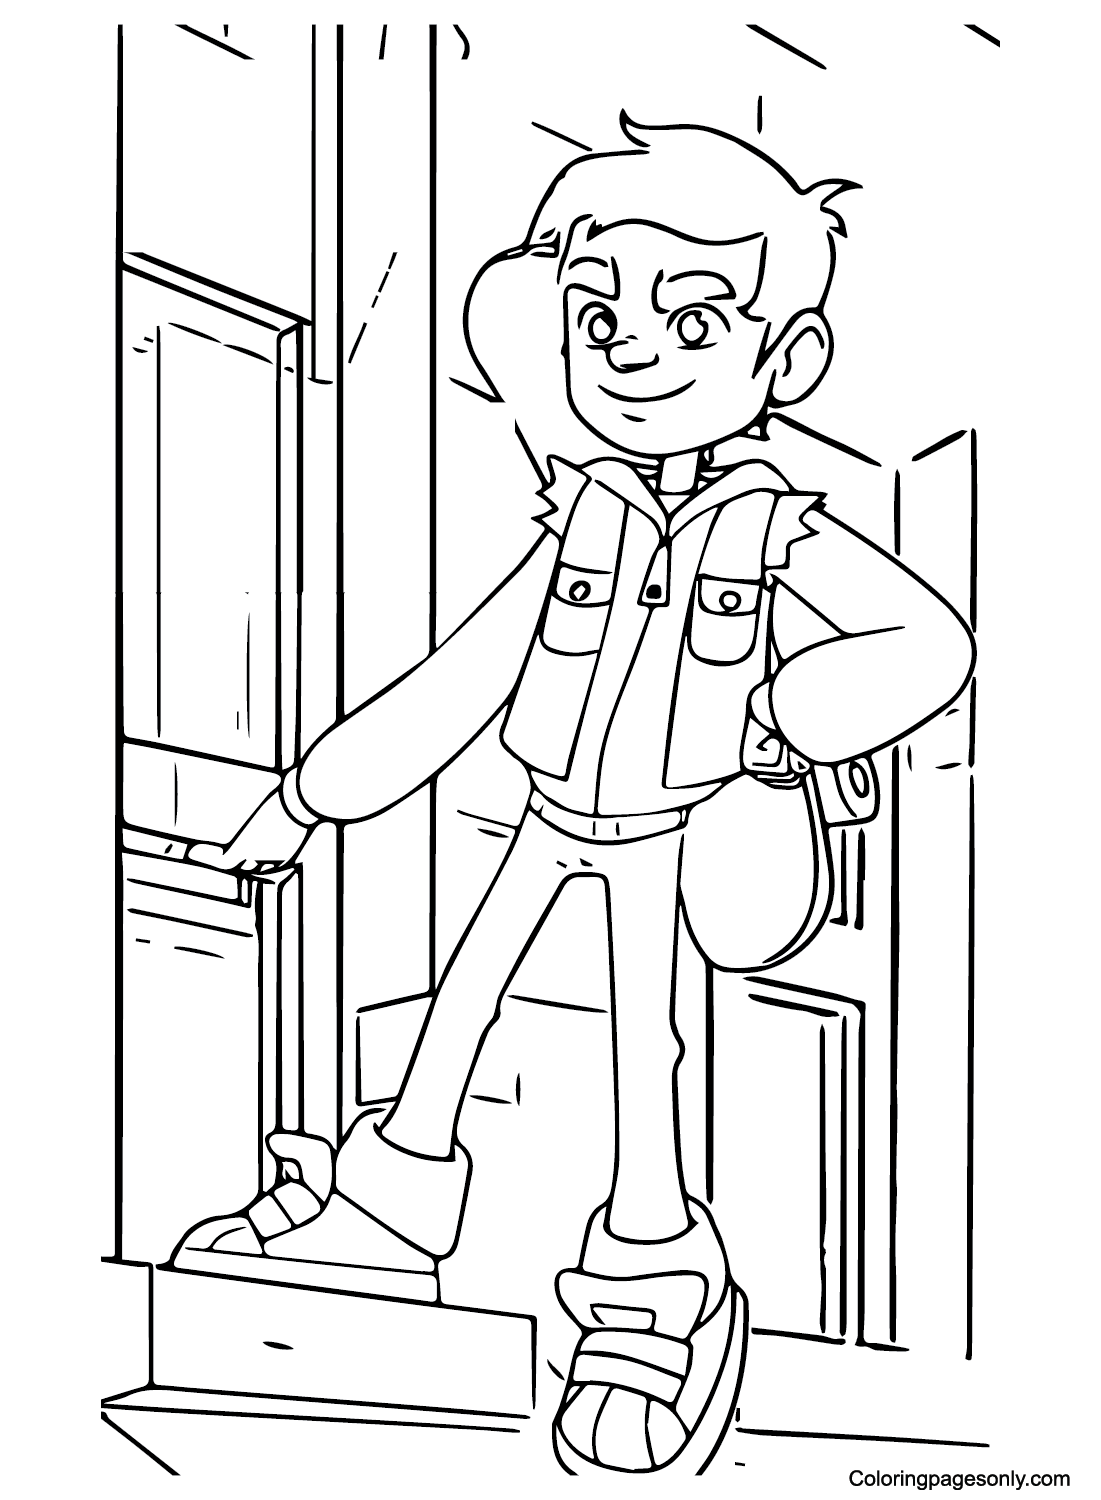 Subway Surfers Coloring Pages Printable for Free Download